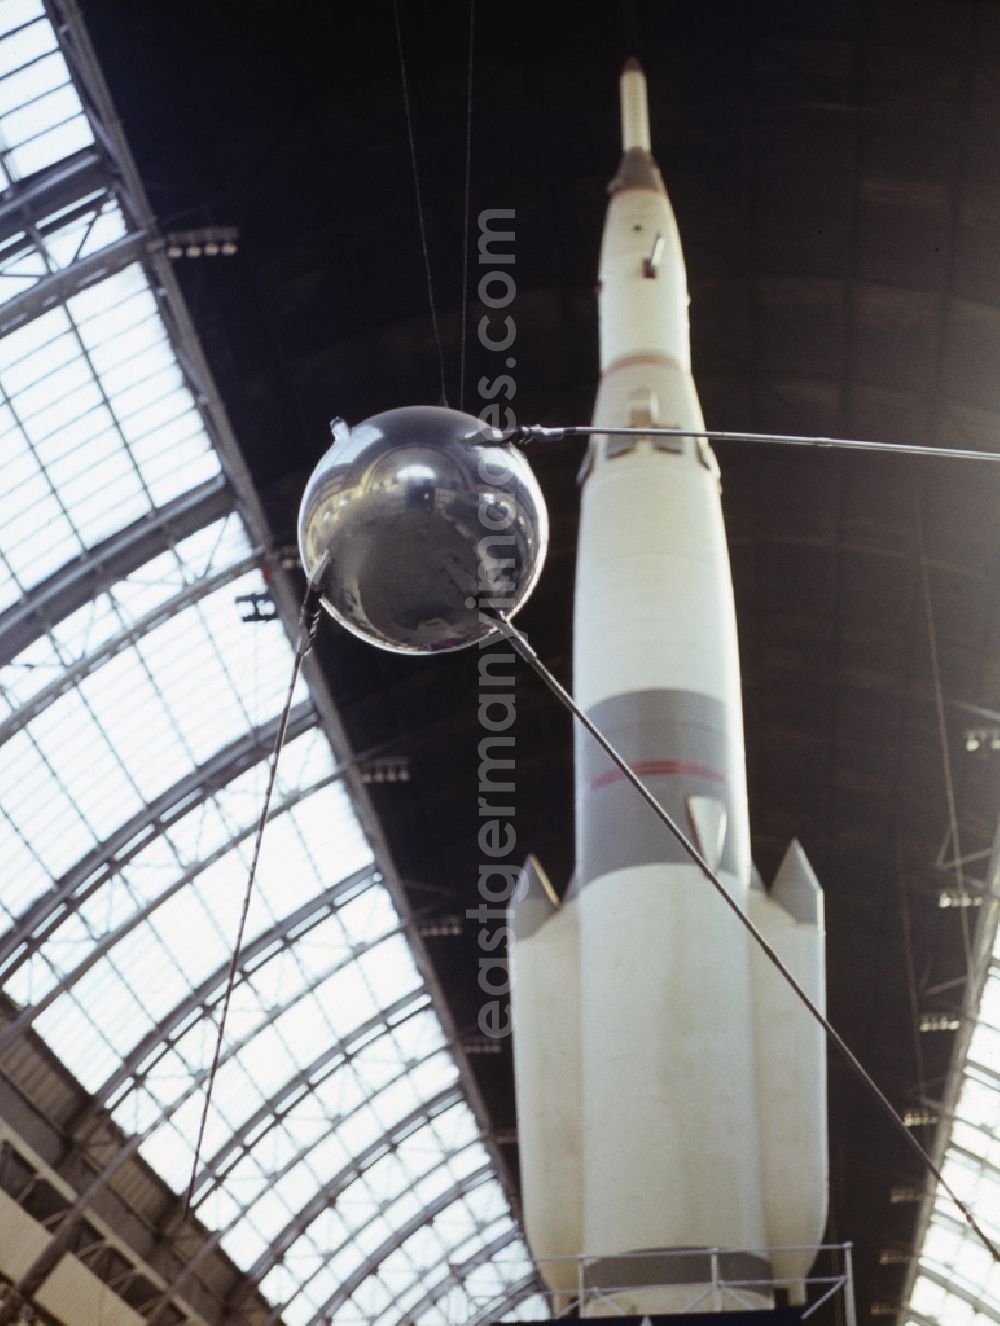 GDR photo archive: Moskau - Sputnik 1 on display at the All-Russia Exhibition Centre in Moscow in Russia. Sputnik 1 was the first artificial earth satellite. With it began in 1957, the space age. Behind this is the Saturn rocket-1